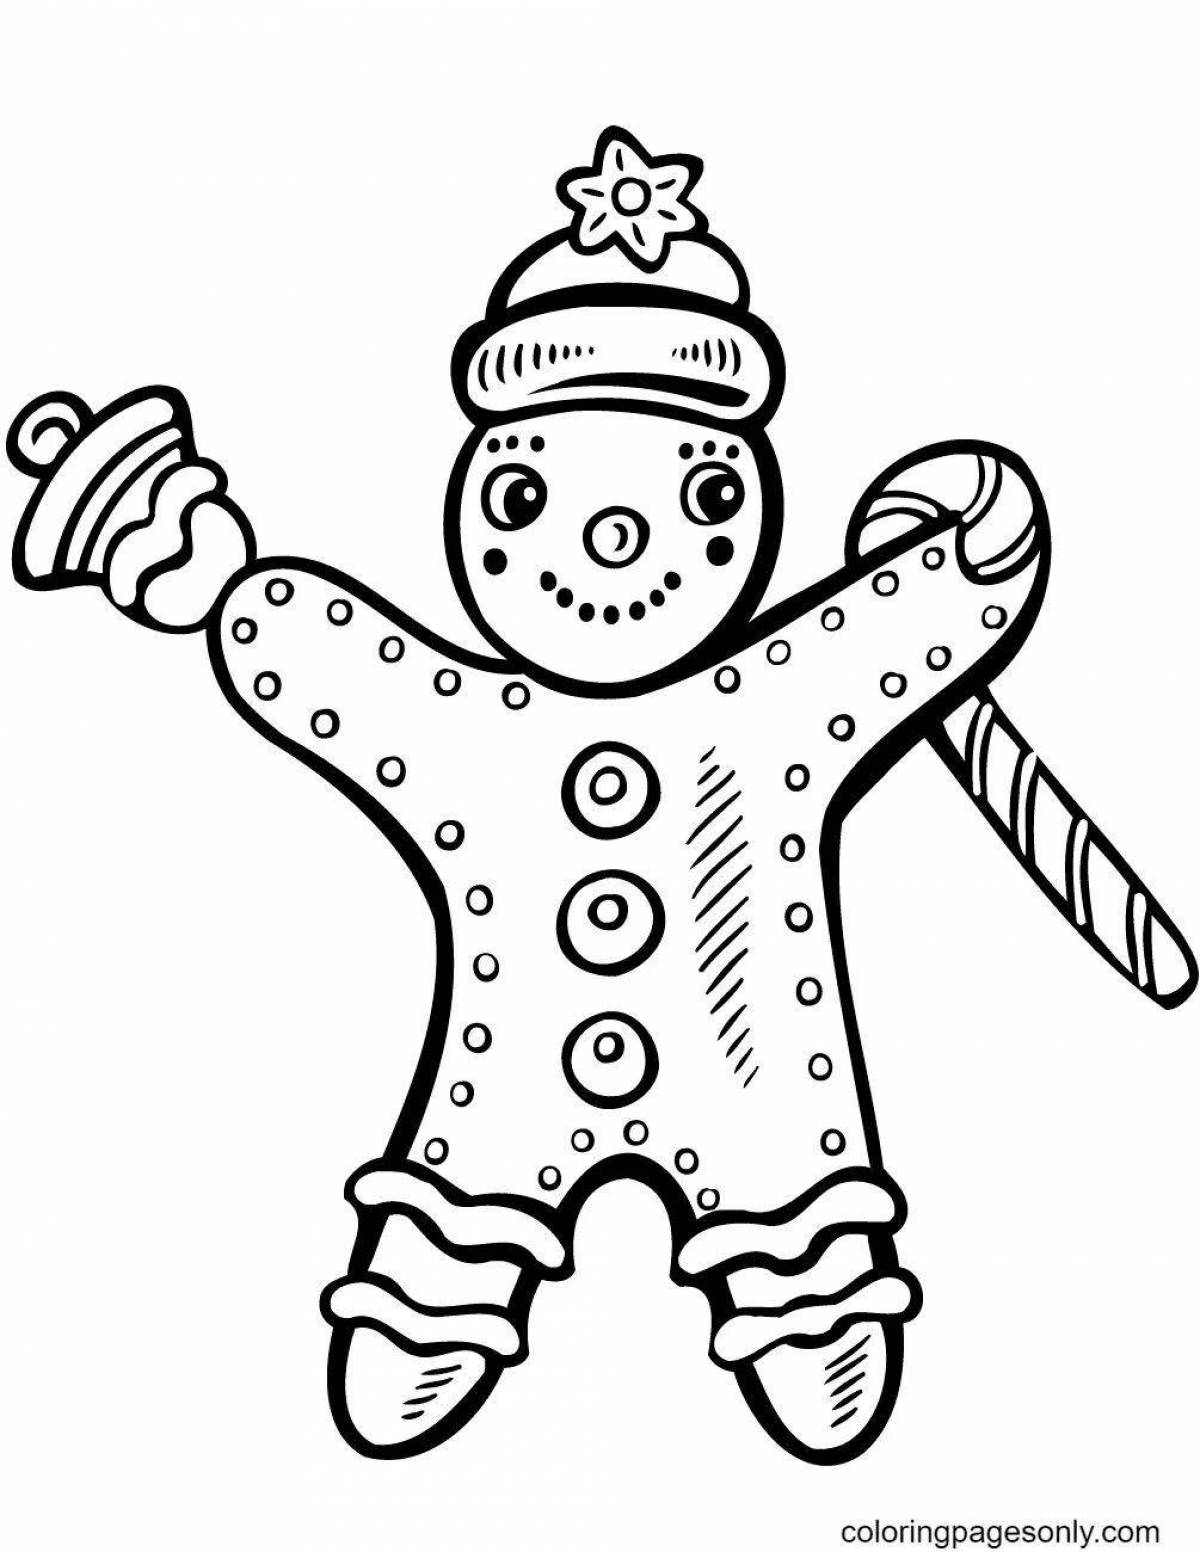 Coloring page amazing gingerbread man